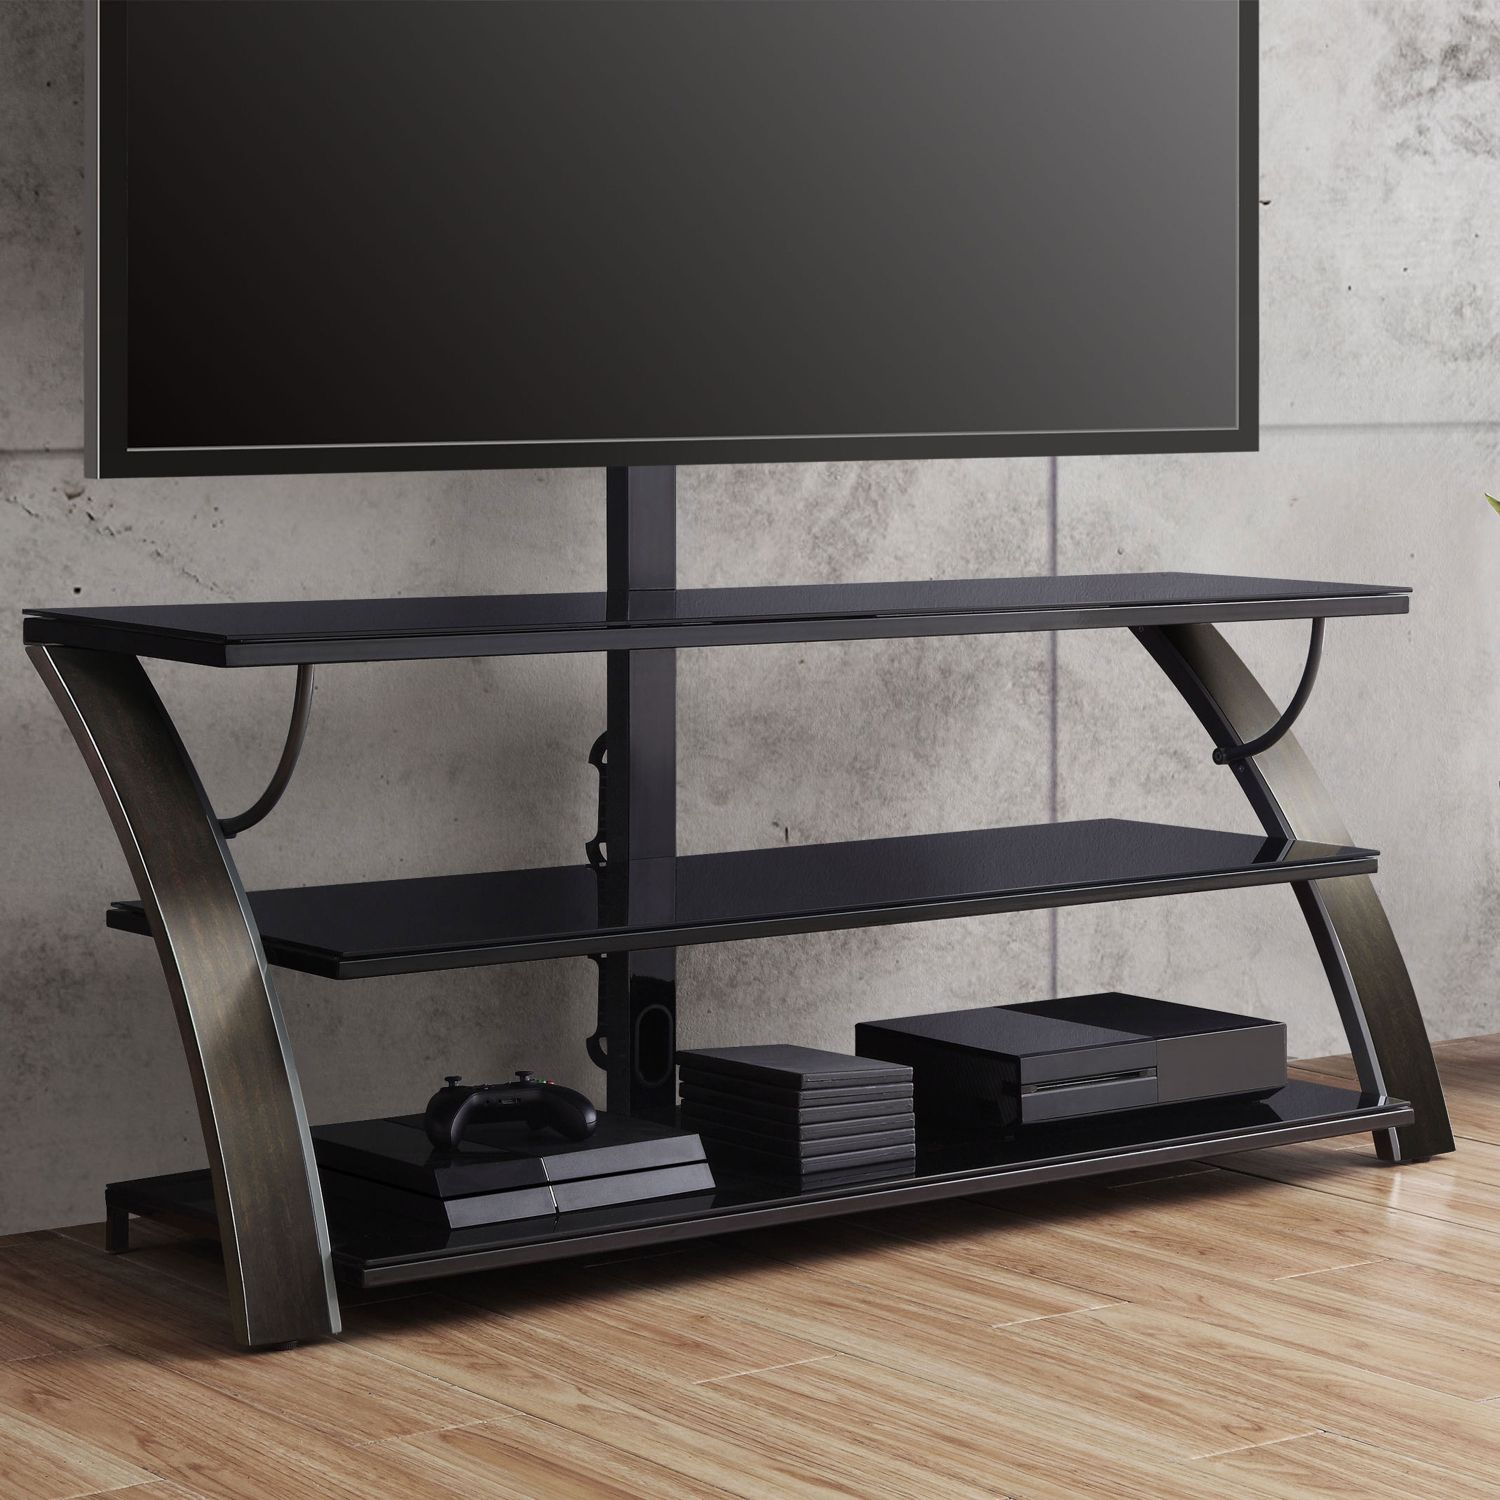 Tv Stand Flat Panel For Tvs Up To 65" Screen Entertainment Intended For Whalen Payton 3 In 1 Flat Panel Tv Stands With Multiple Finishes (View 9 of 15)